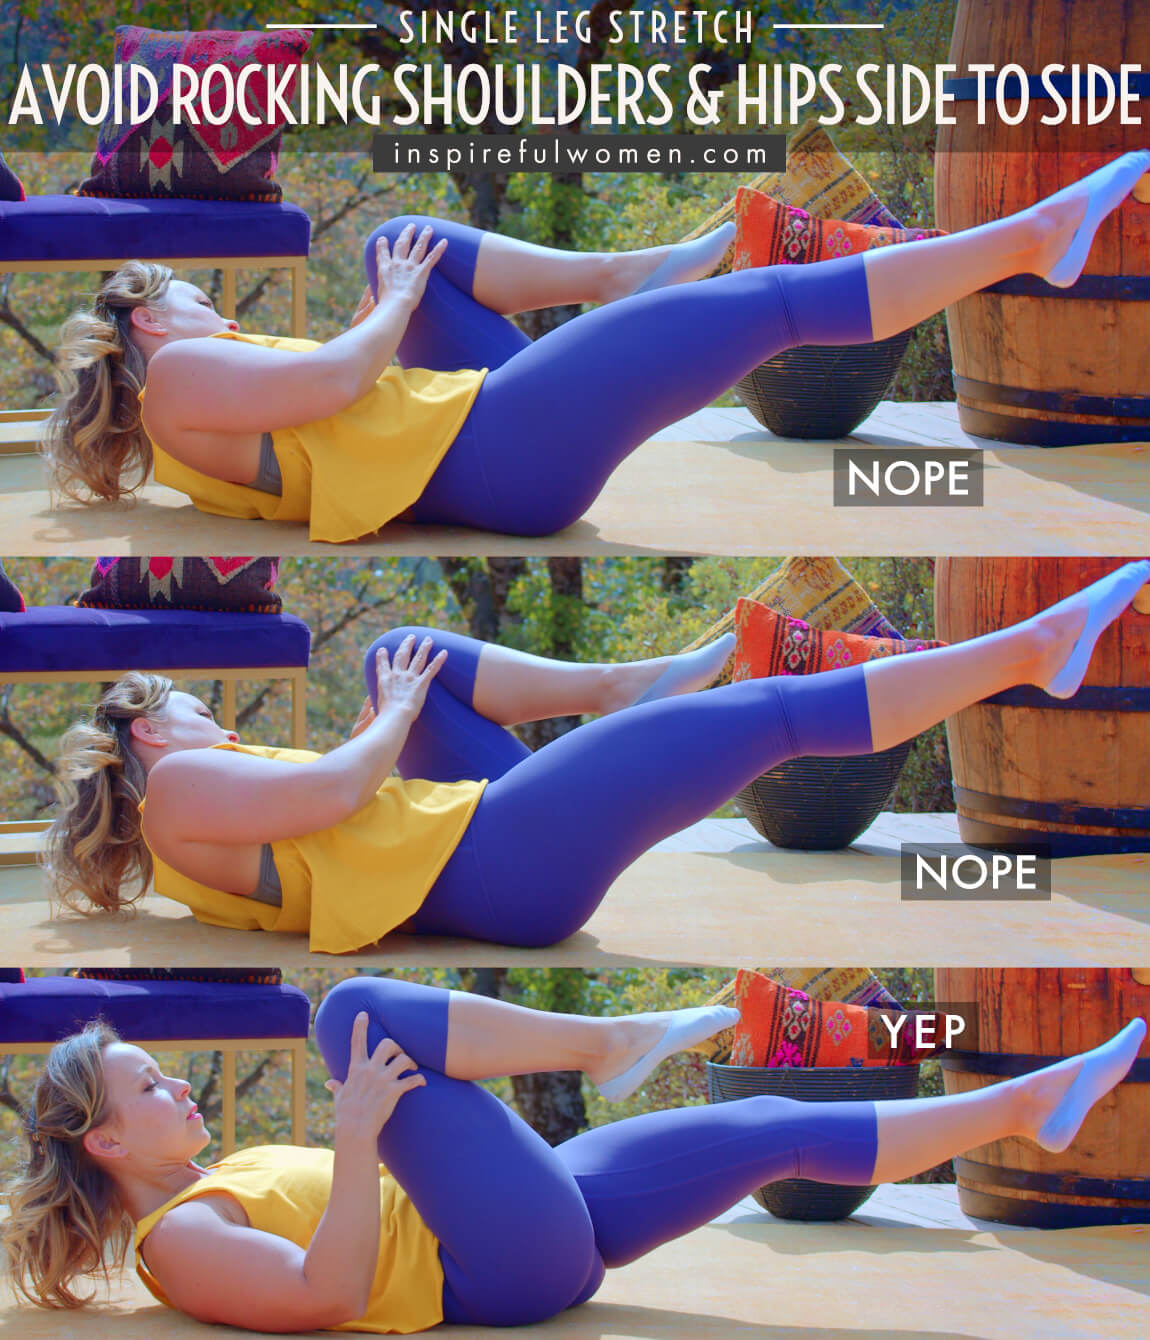 avoid-rocking-shoulders-and-hips-side-to-side-single-leg-stretch-pilates-core-exercise-common-mistakes